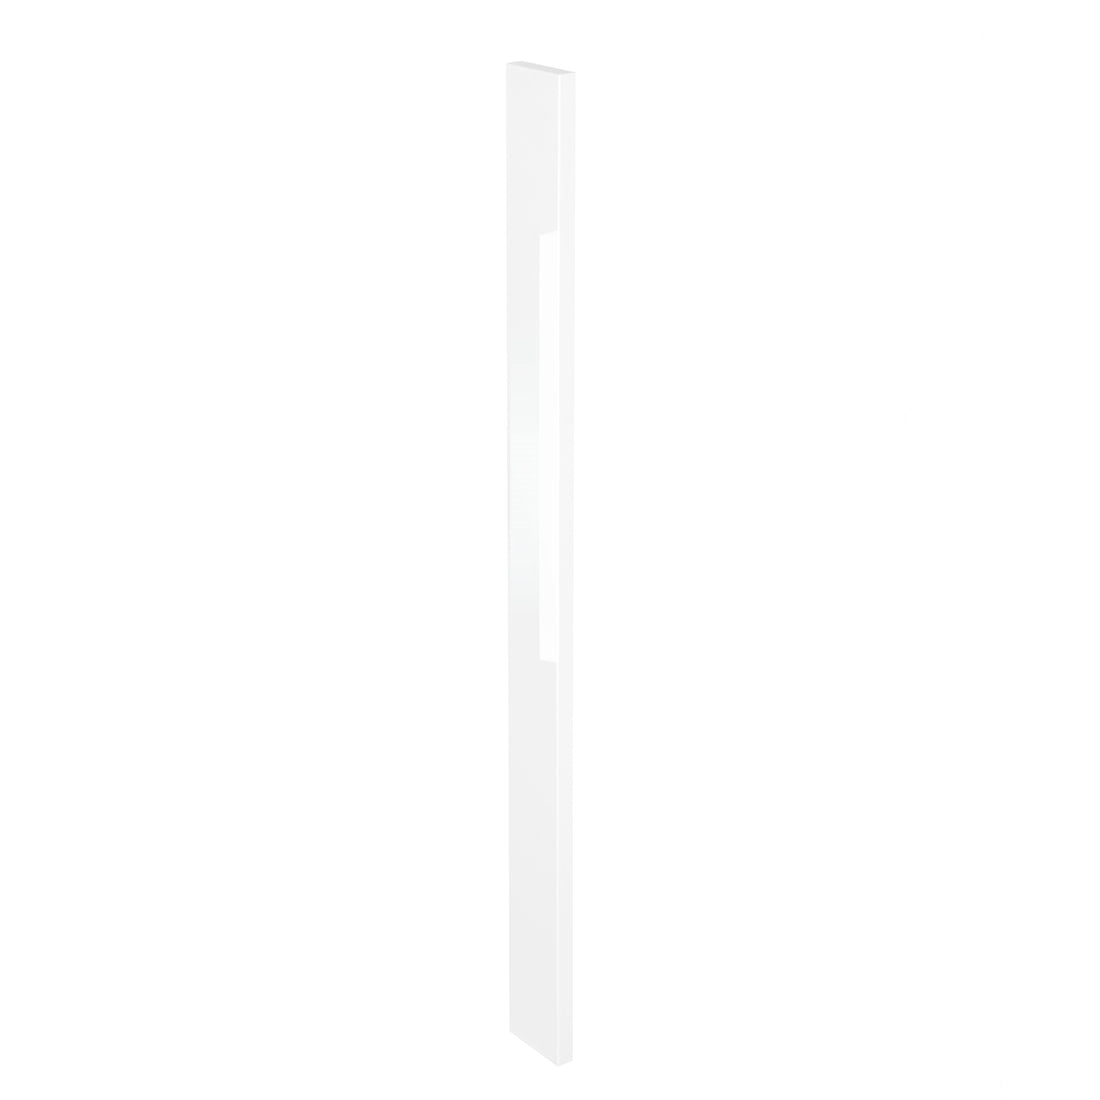 White Gloss Slab Style Kitchen Cabinet Filler (3 in W x 0.75 in D x 34.5 in H) -  Pro-Edge HD